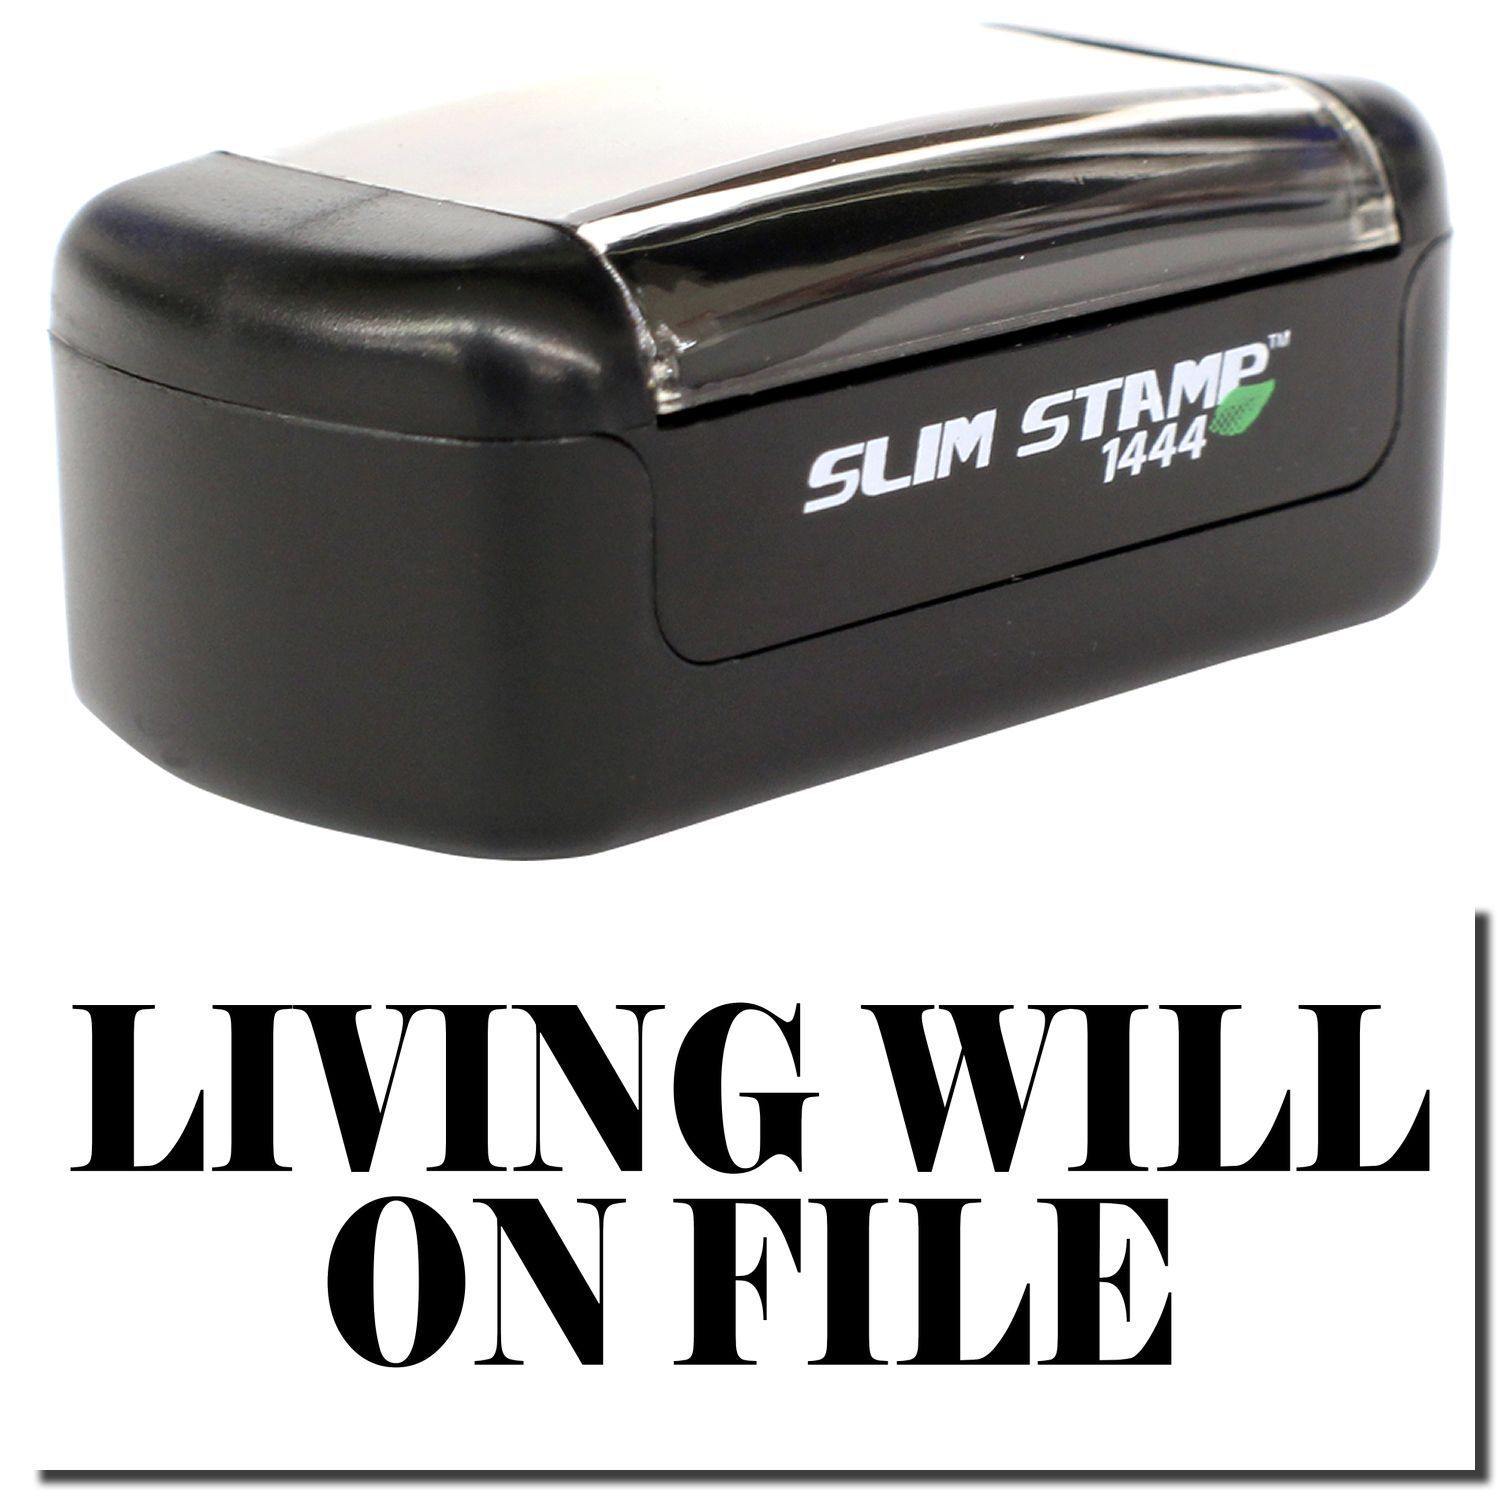 A stock office pre-inked stamp with a stamped image showing how the text "LIVING WILL ON FILE" is displayed after stamping.